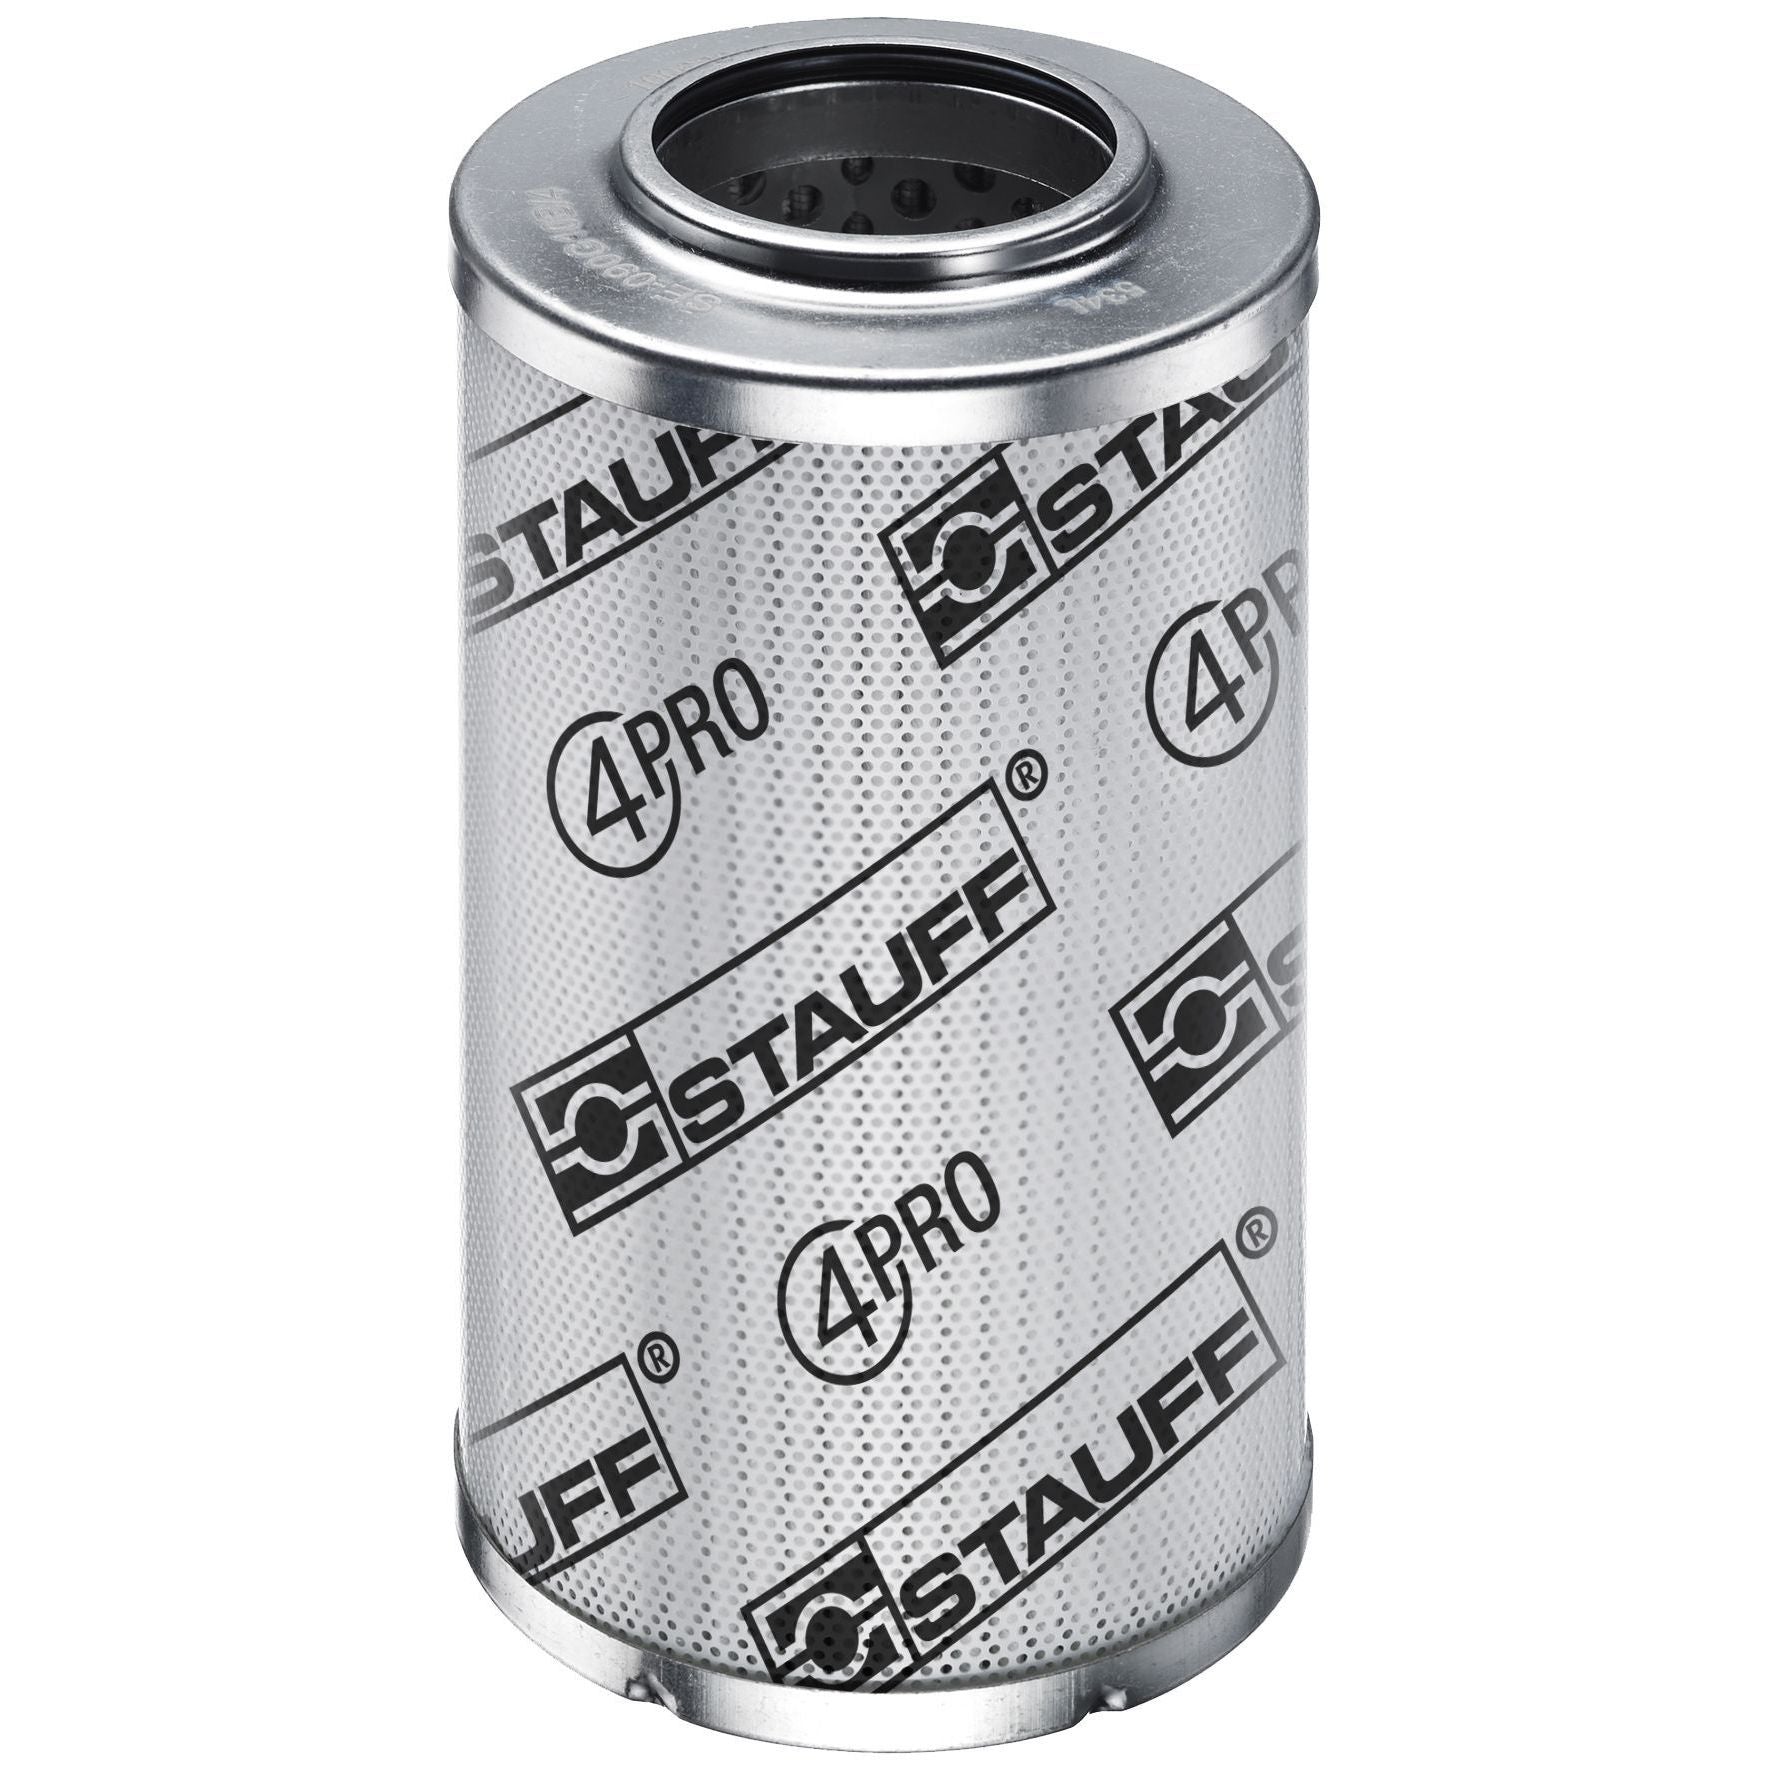 SE-125-G-05-B/4 : Stauff SF-125 Series Filter Element, 5 Micron, Synthetic, 363psi Collapse Differential, Buna